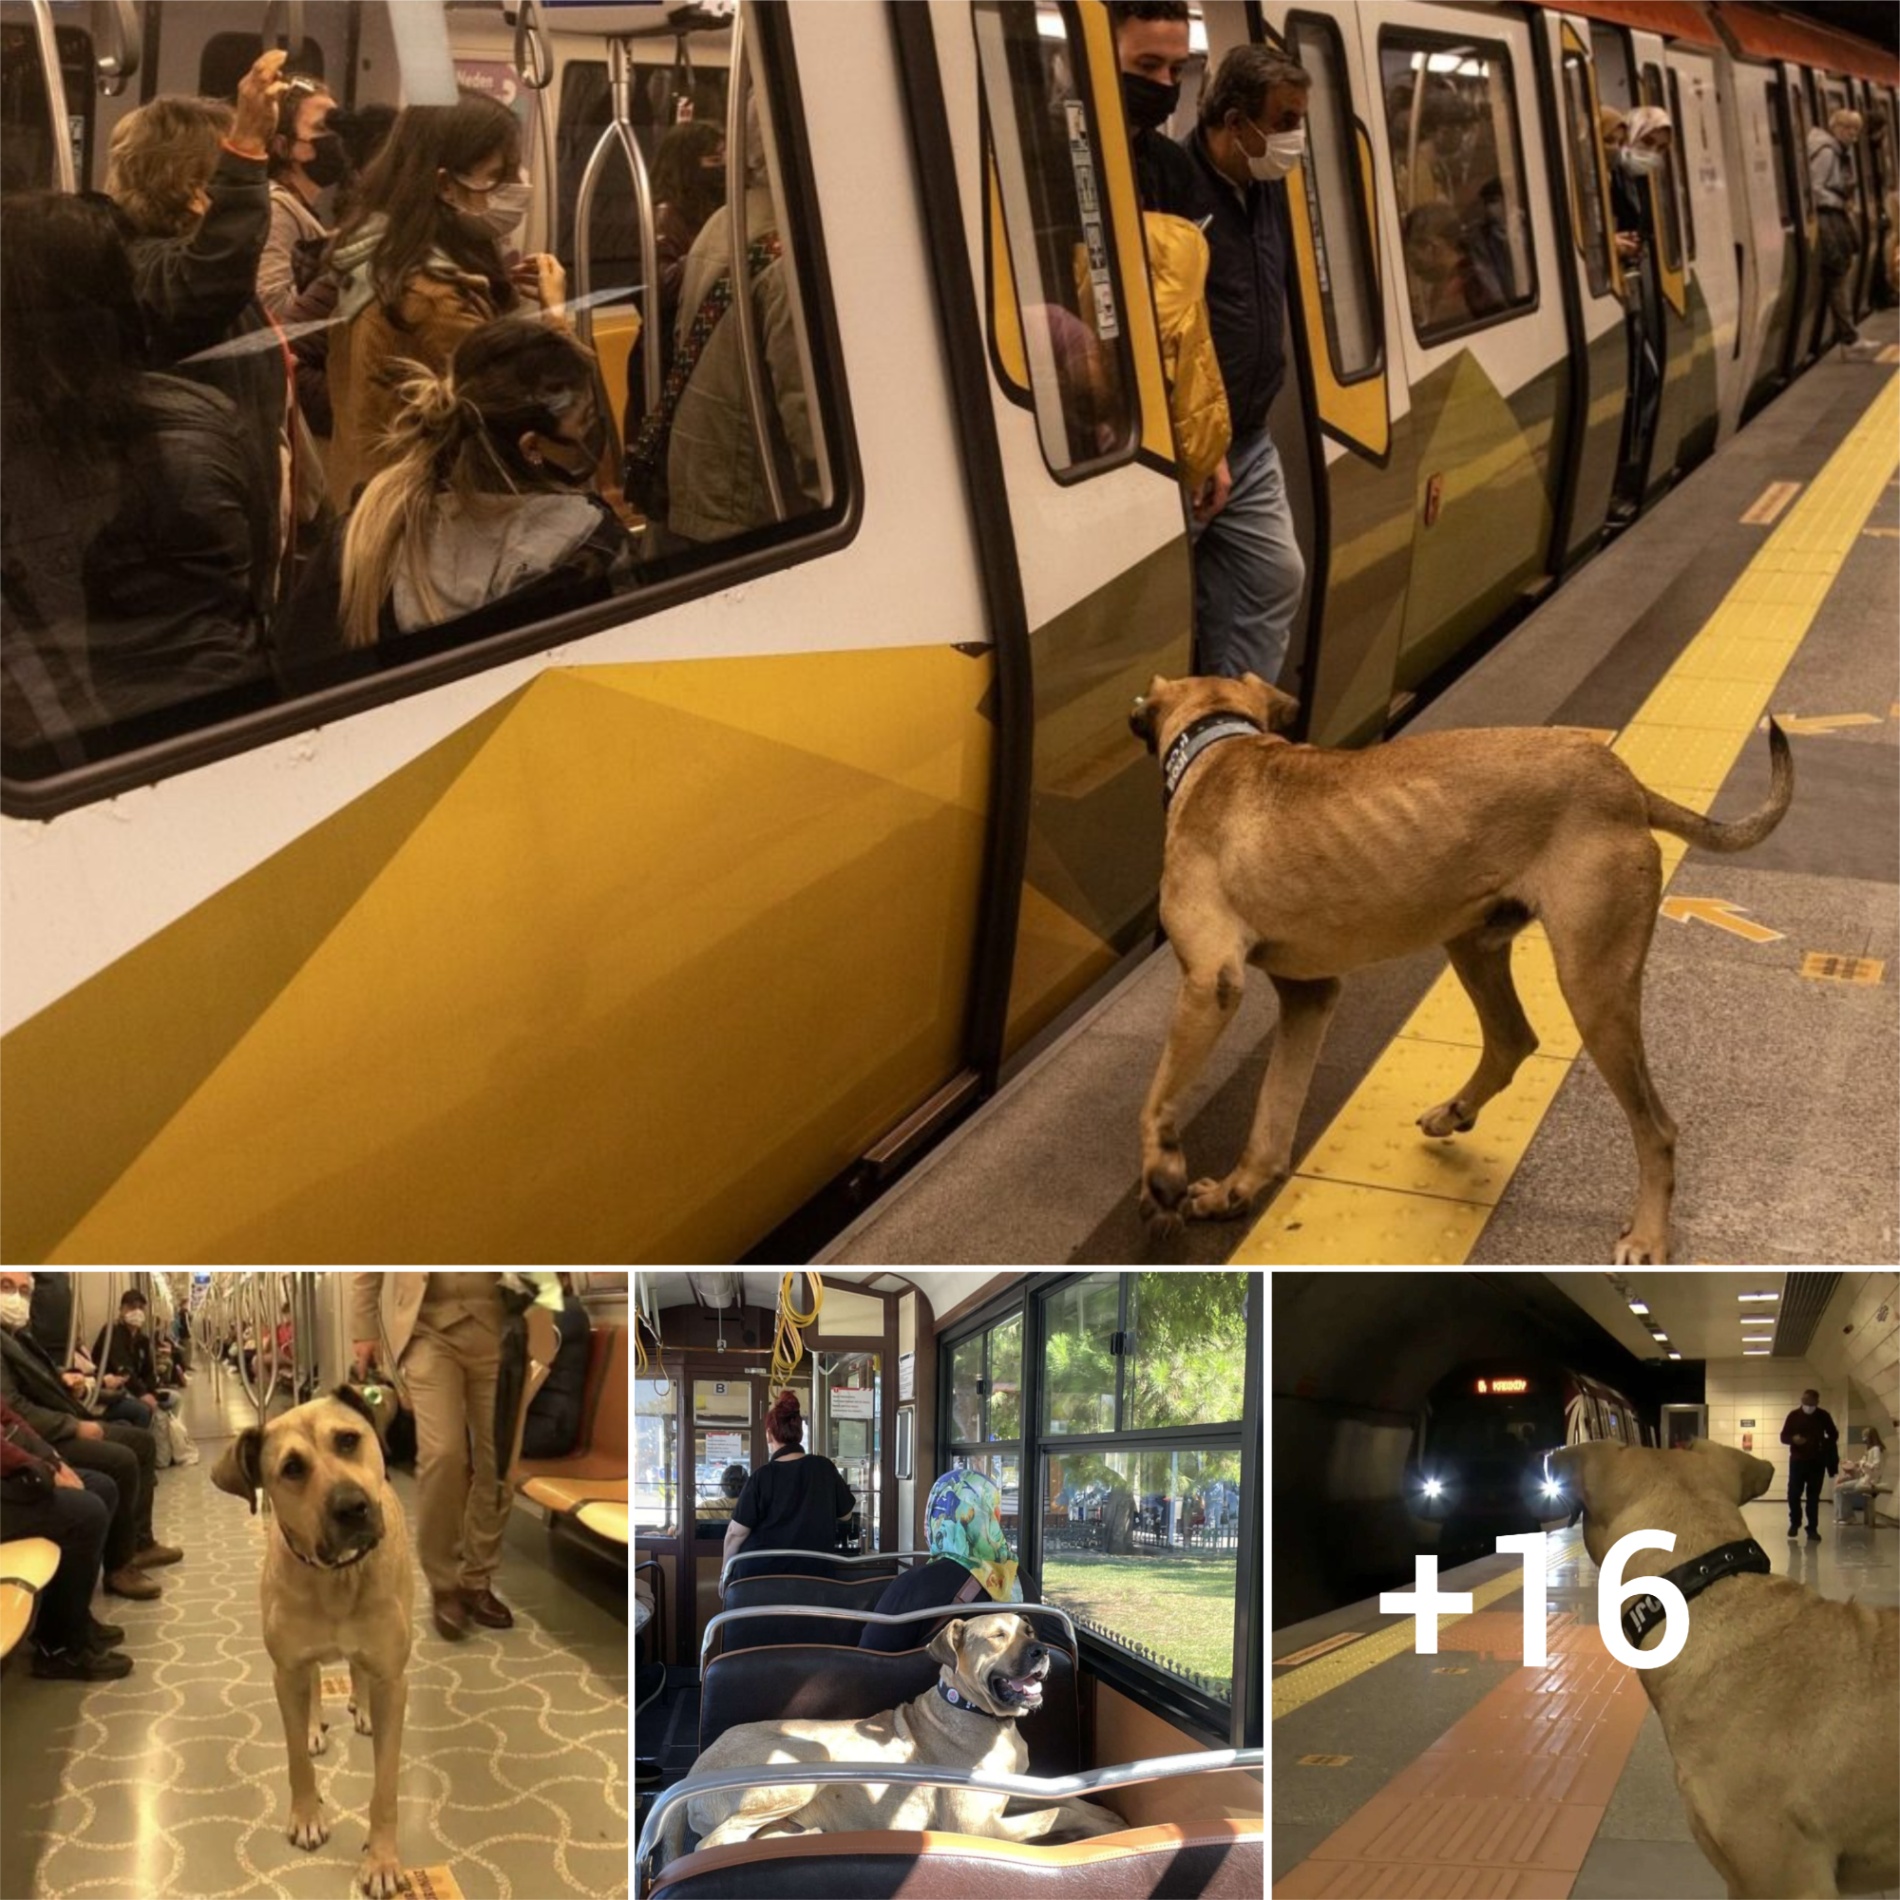 Every day, a loyal dog stands guard at the subway station, patiently waiting for its owner’s return, touching hearts and spreading a deep sense of devotion.